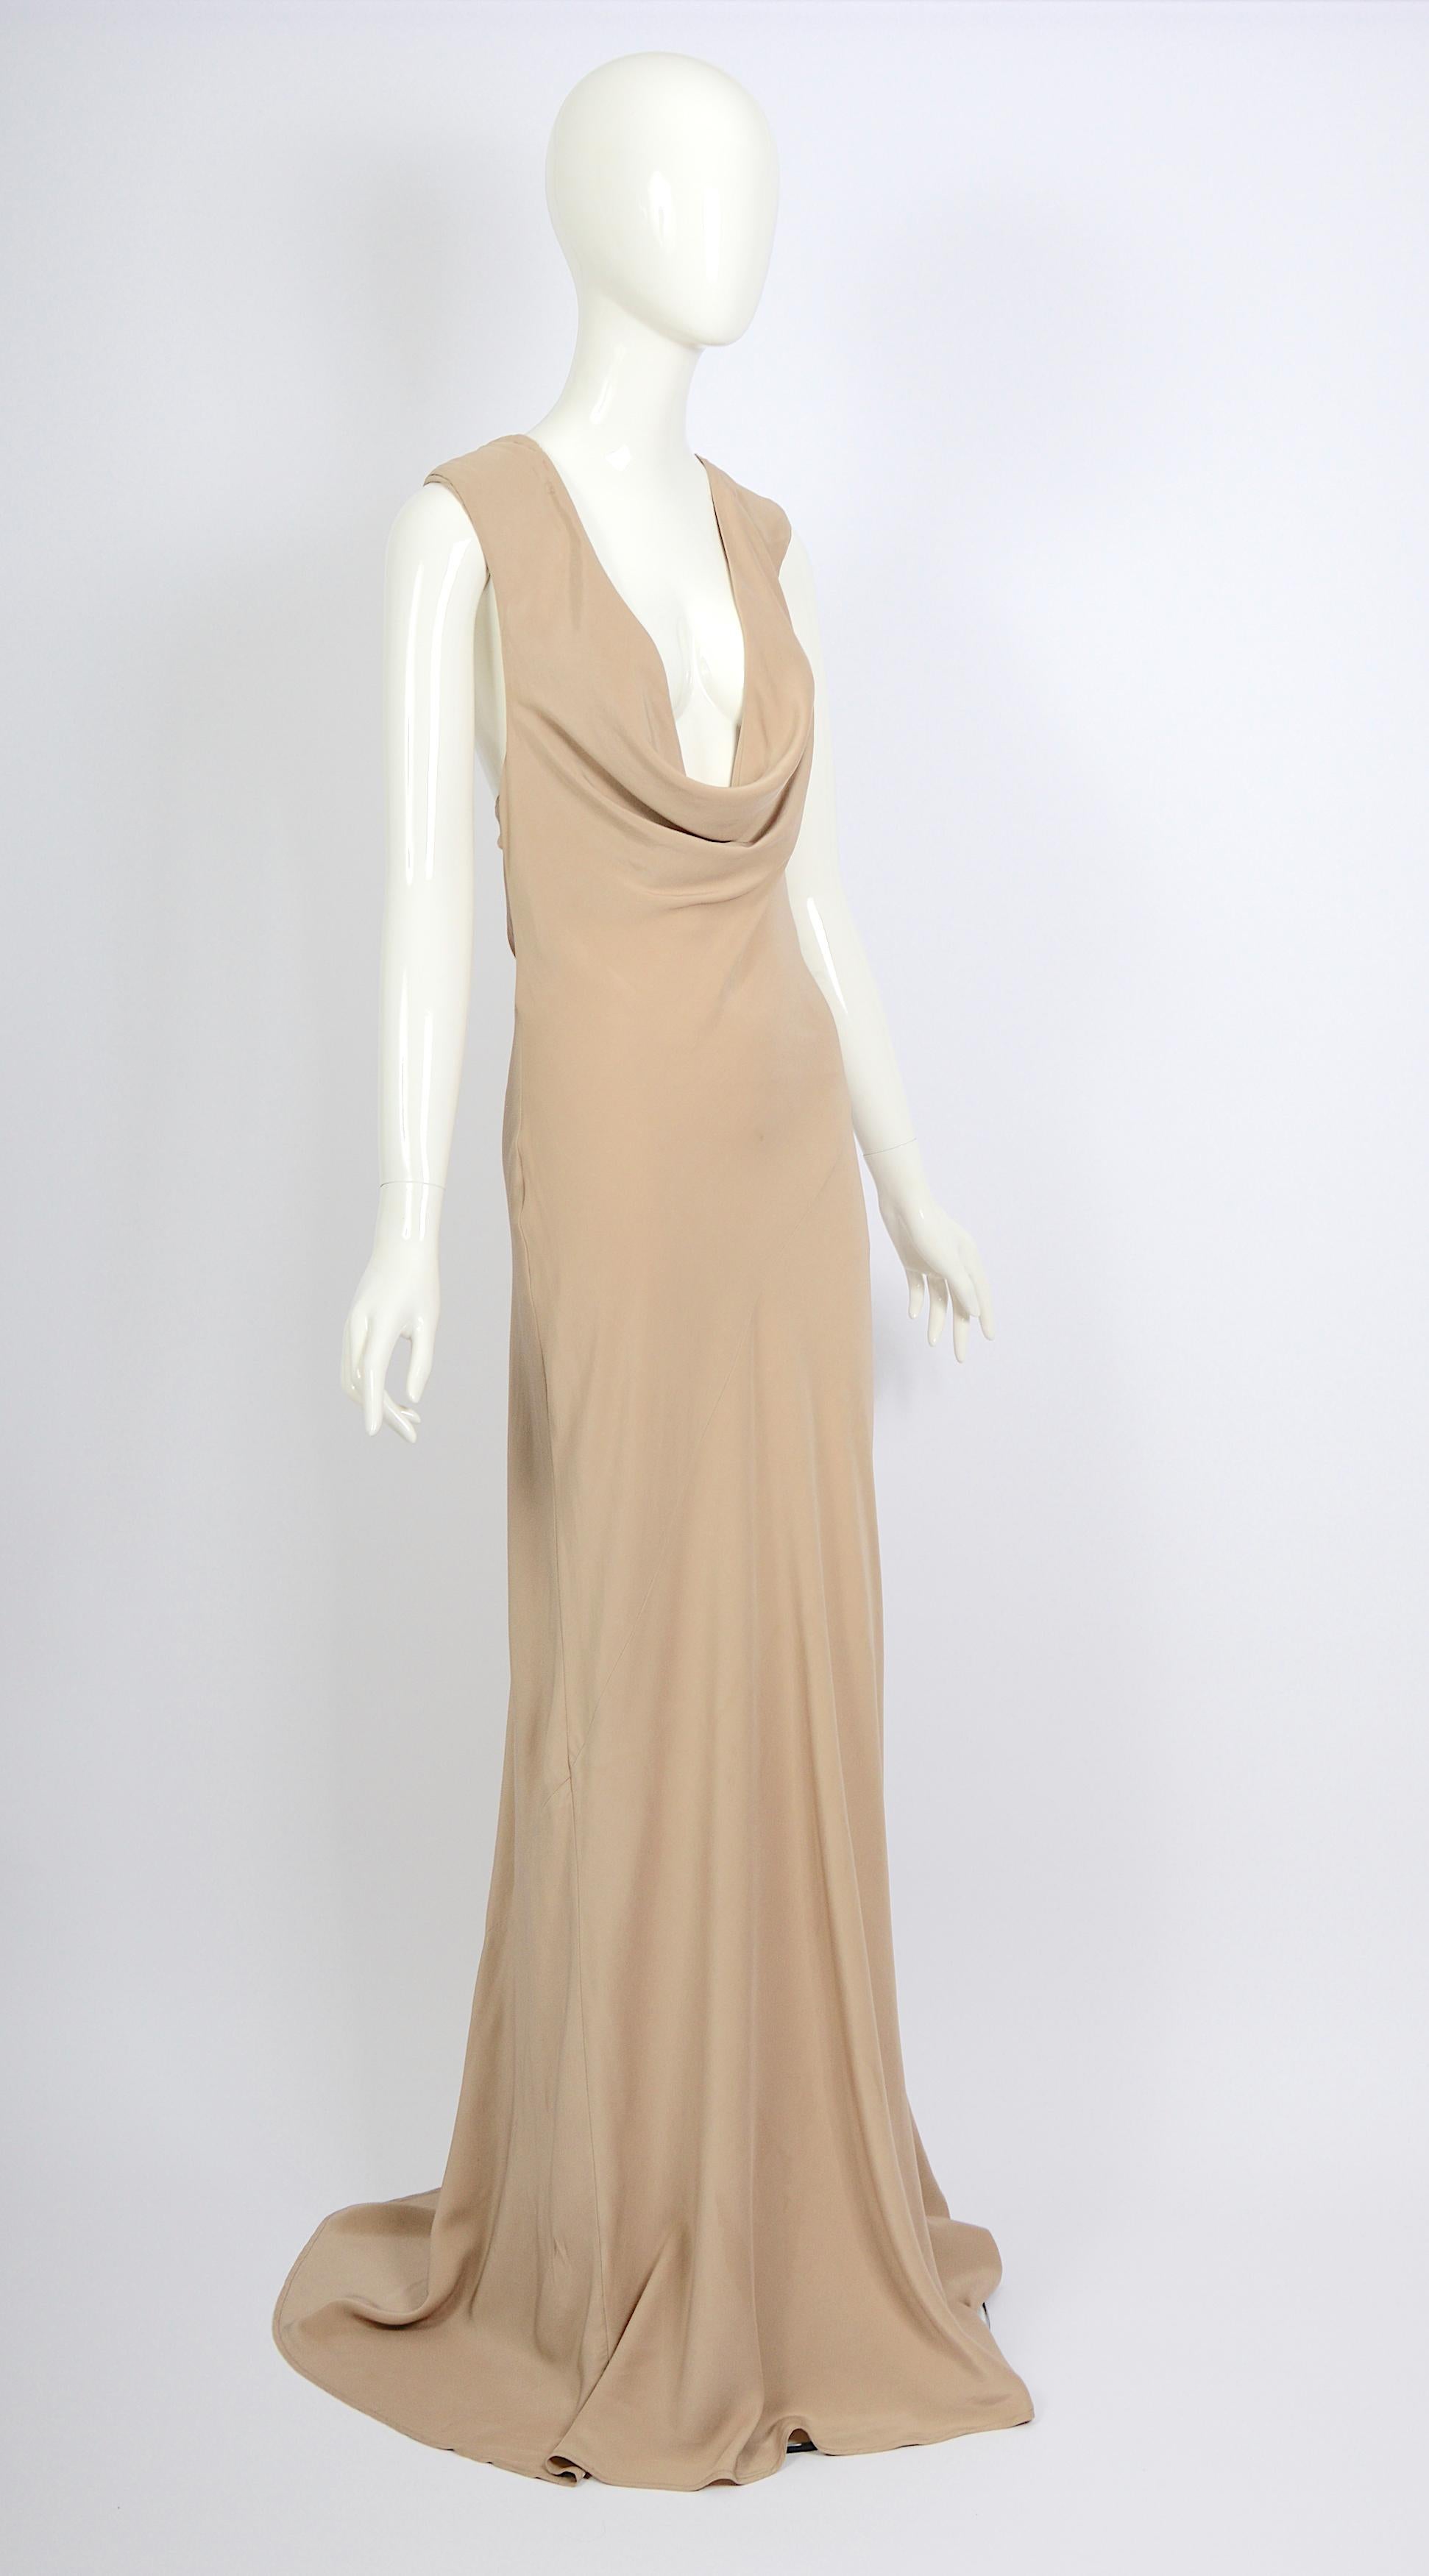 Verlaine Vintage presents a gorgeous nude silk dress from the Belgian designers duo A.F. Vandevorst's Spring 2001 runway. It comes with an open back and a stylish train.
We have not altered the straps of the dress, allowing the buyer the flexibility